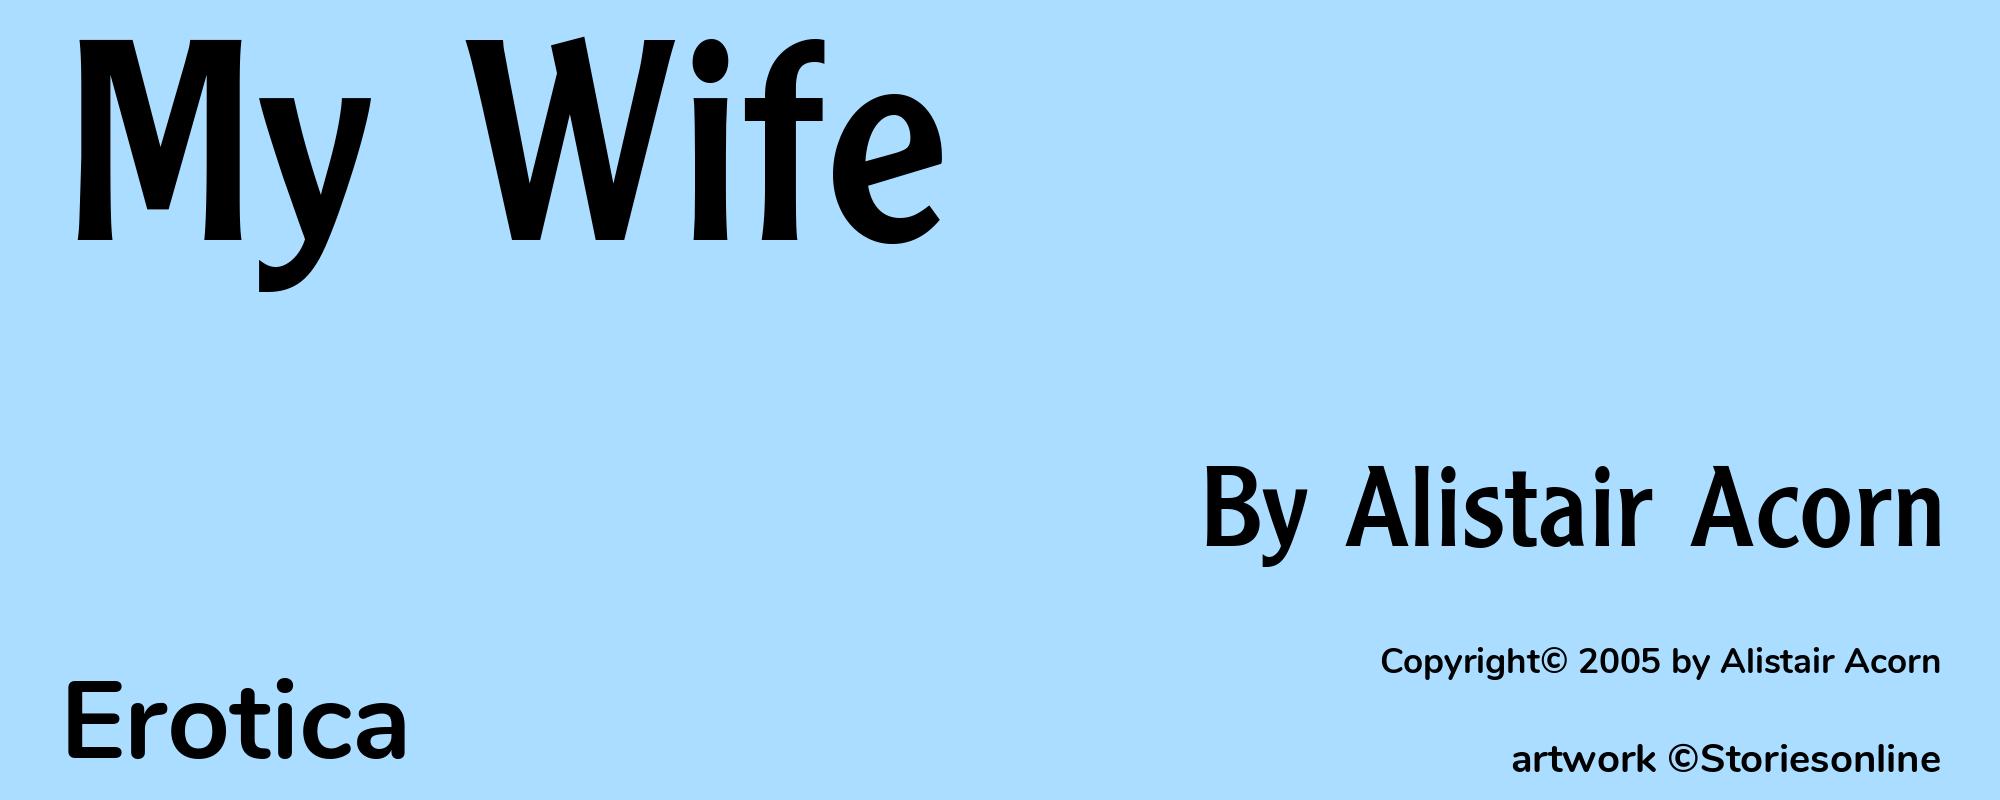 My Wife - Cover